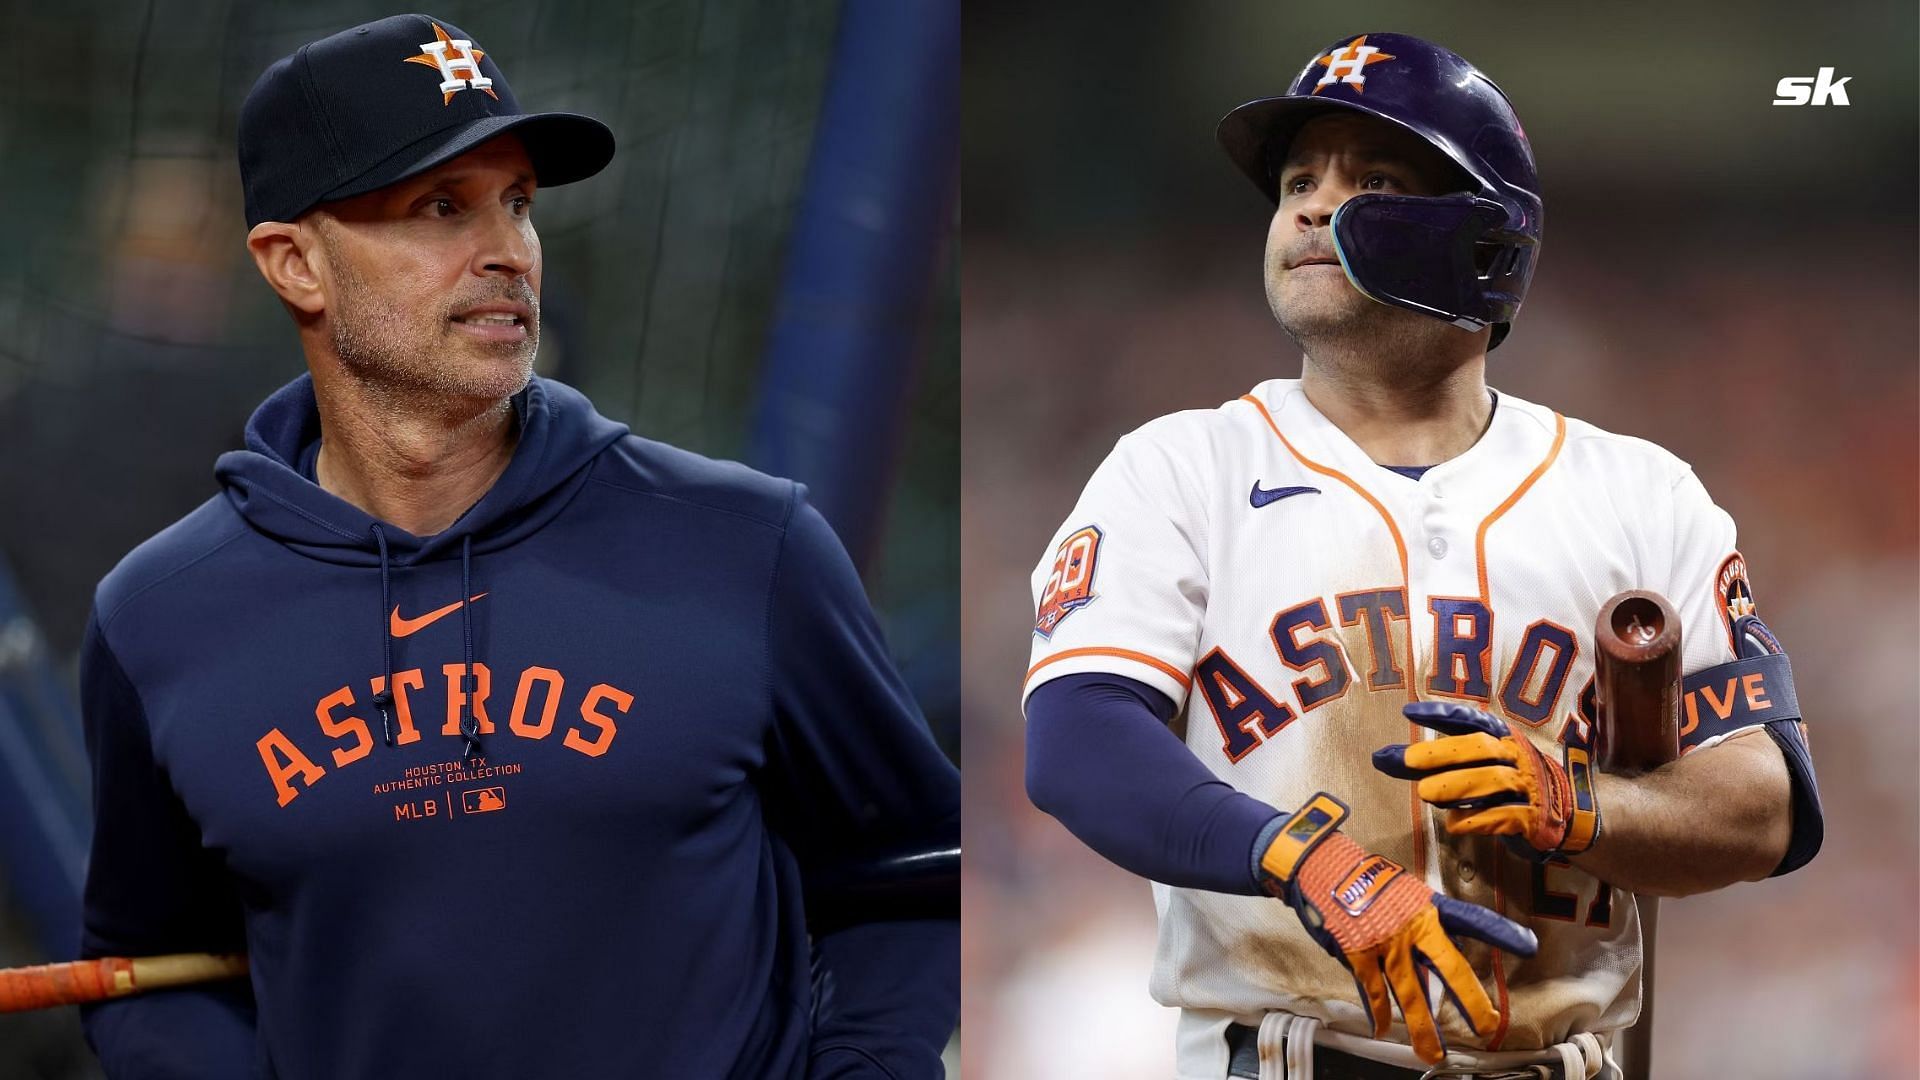 We are a winning team, we have a winning culture" - Astros manager Joe  Espada optimistic of turning things around after shambolic start of the  season